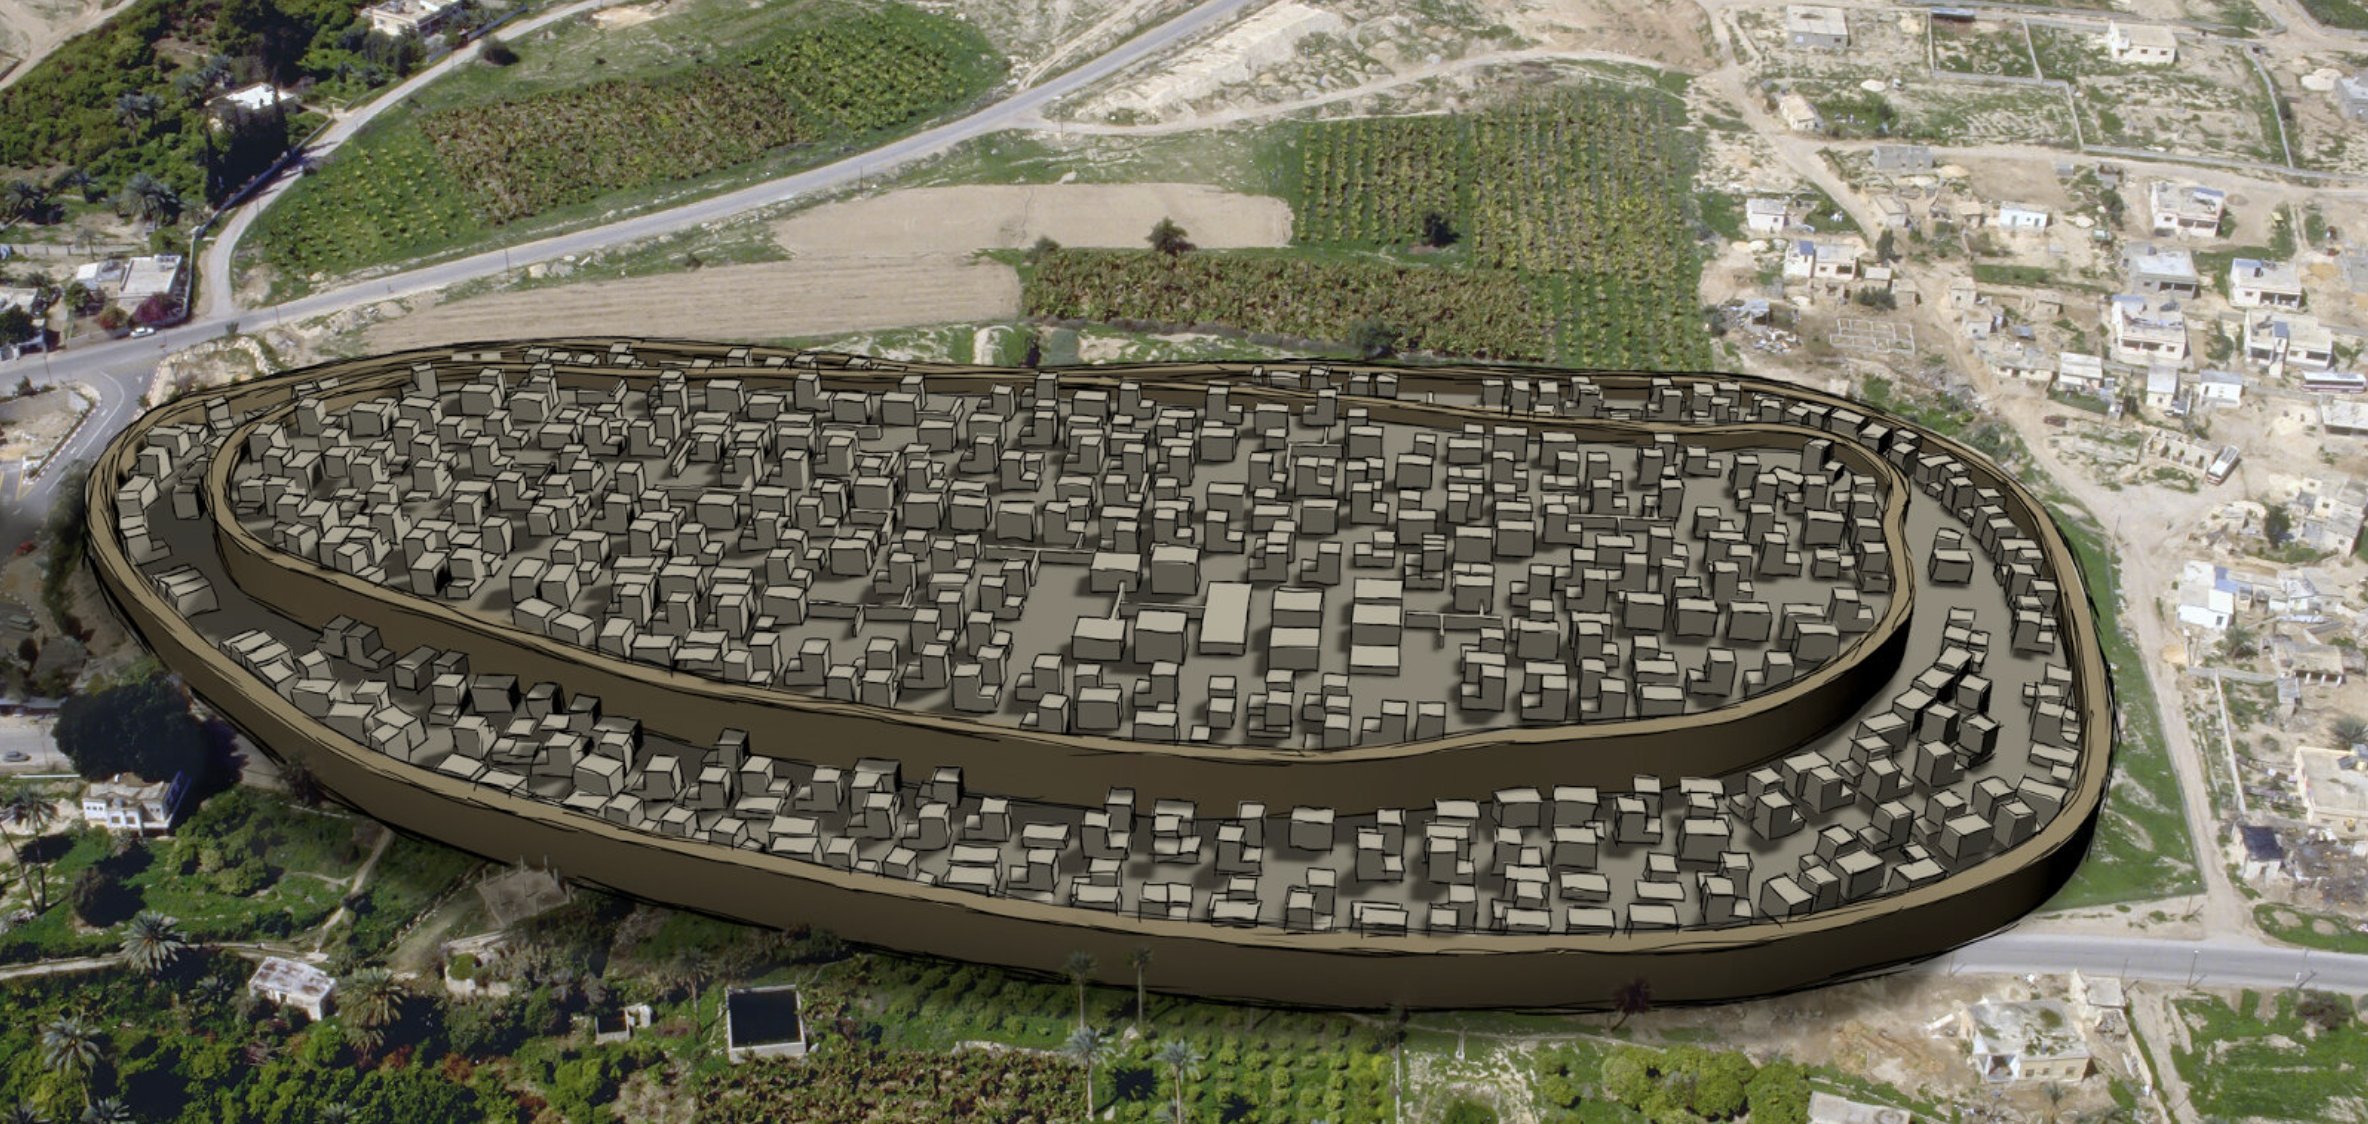 A virtual reconstruction of what the city of Jericho looked like in the time of Joshua and the Conquest.